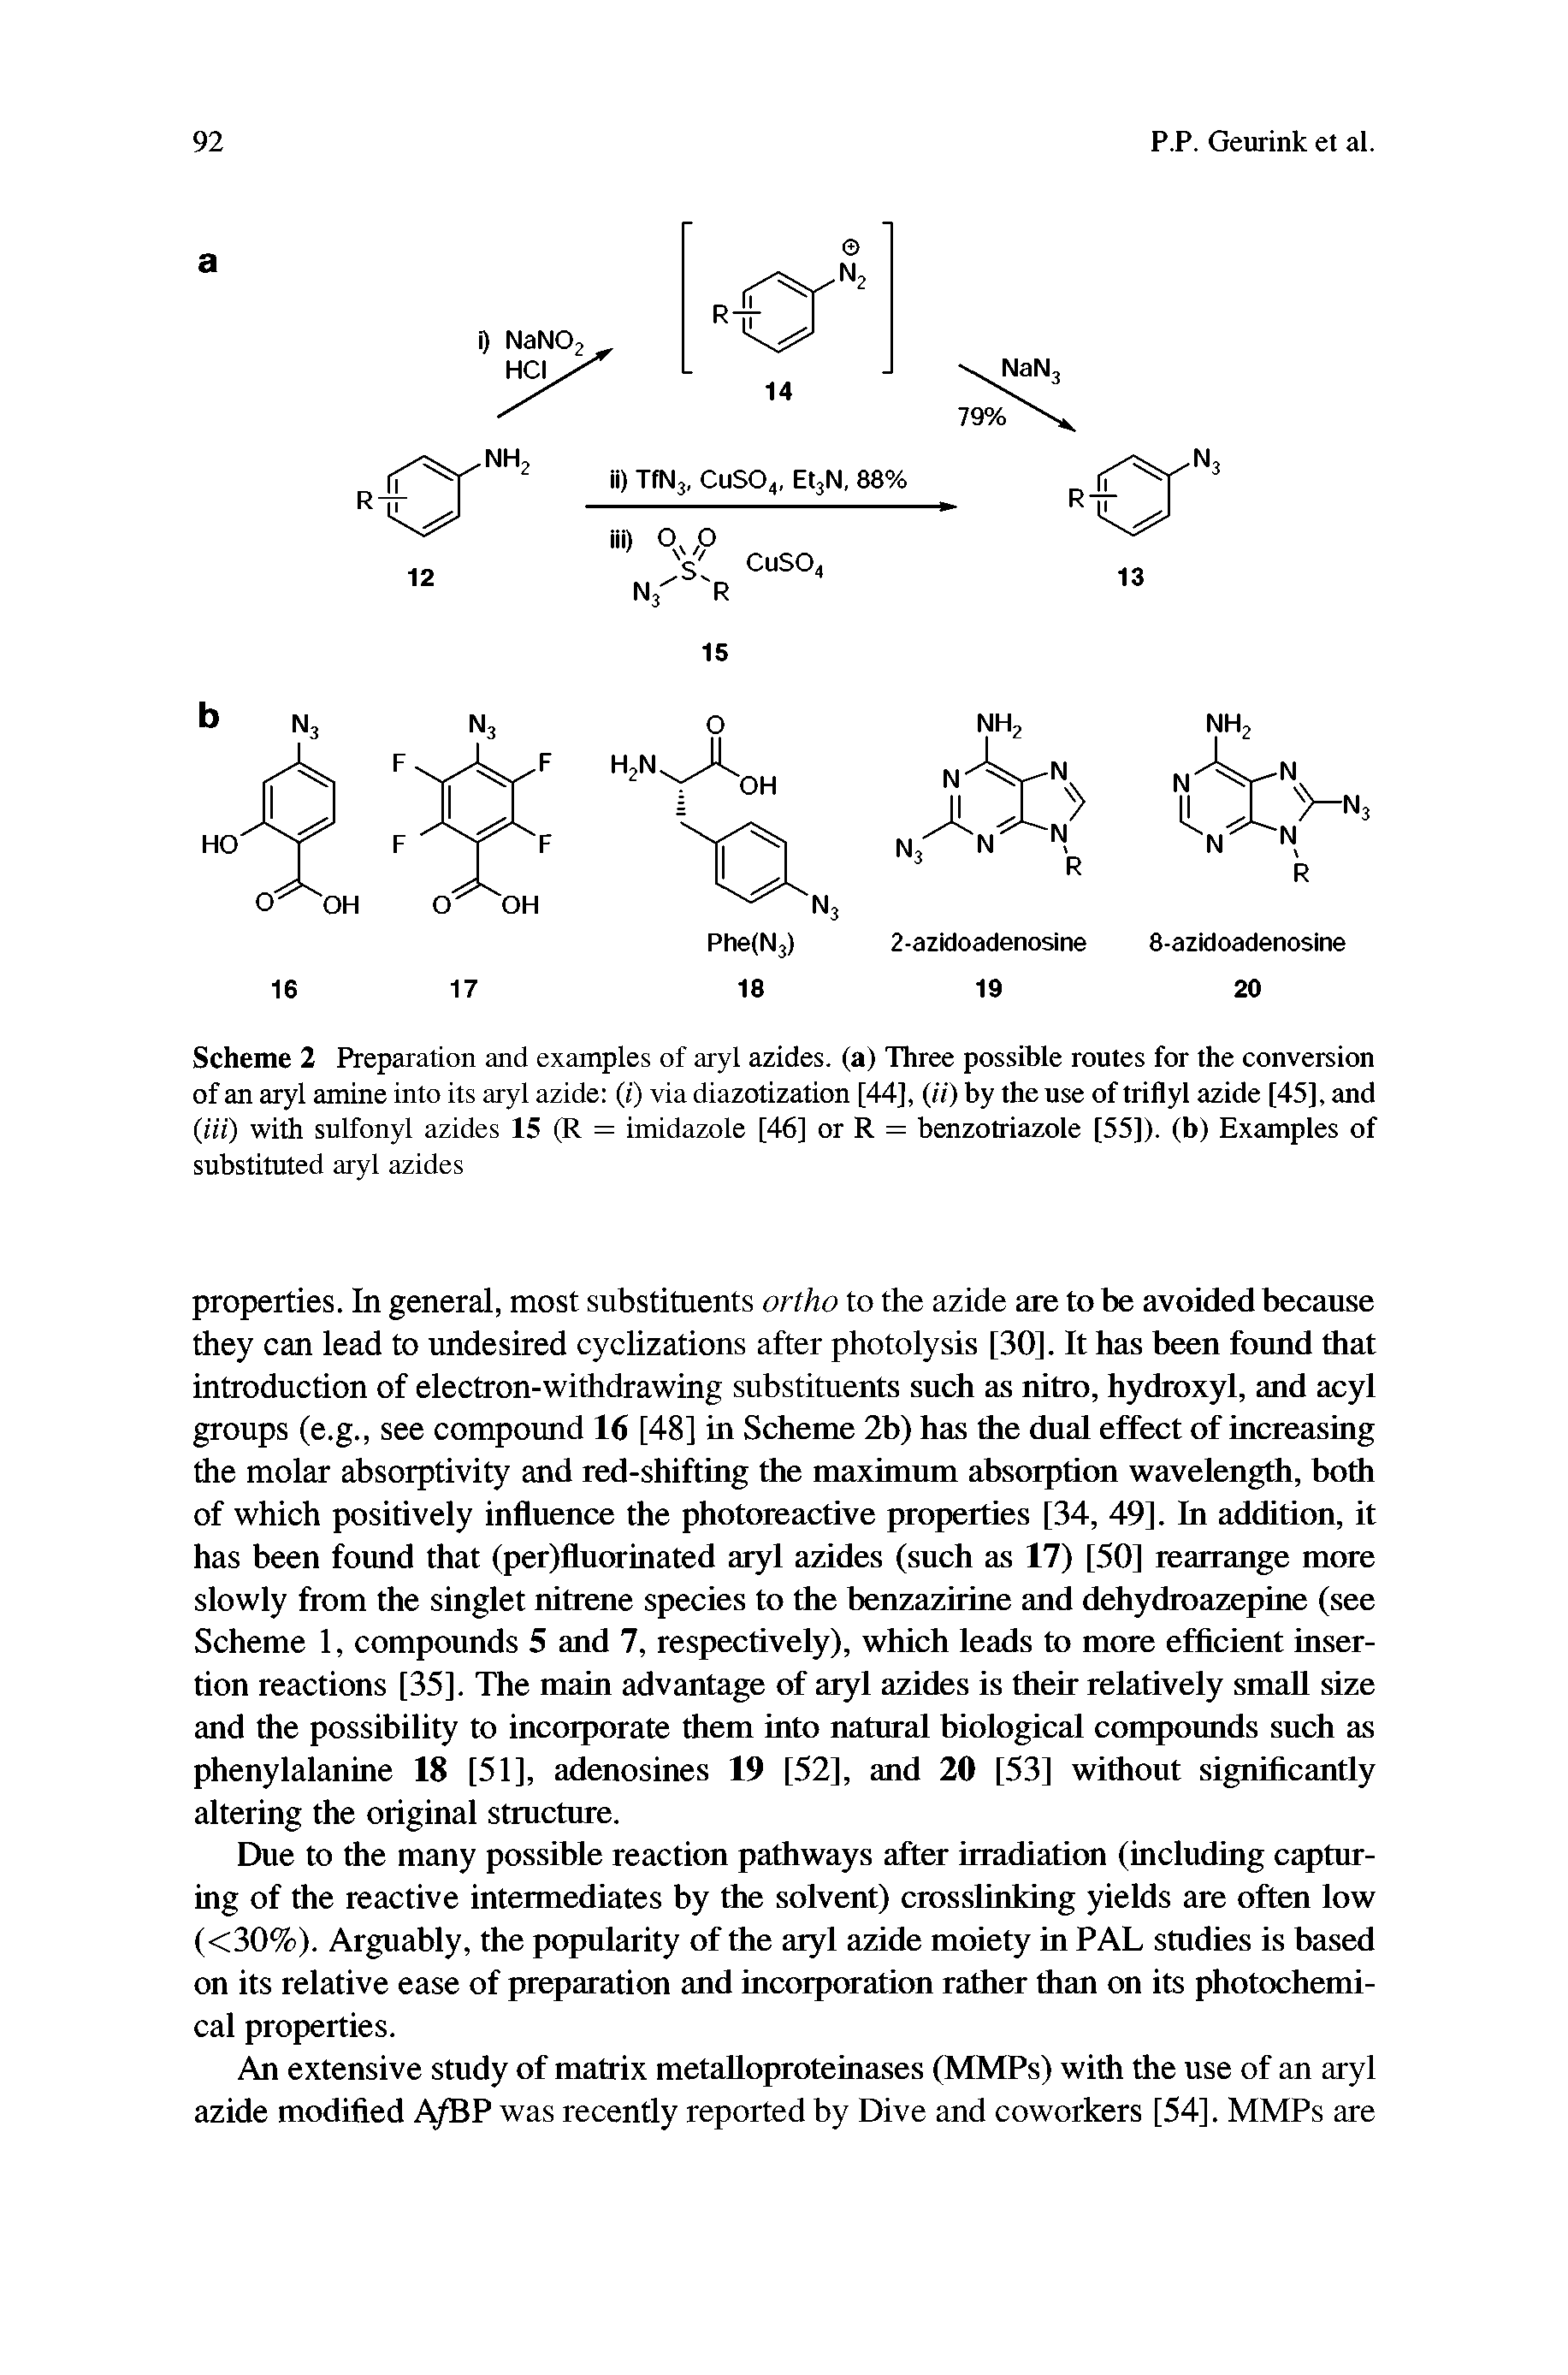 Scheme 2 Preparation and examples of aryl azides, (a) Three possible routes for the conversion of an aryl amine into its aryl azide (i) via diazotization [44], (ii) by the use of triflyl azide [45], and (iii) with sulfonyl azides 15 (R = imidazole [46] or R = benzotriazole [55]). (b) Examples of substituted aryl azides...